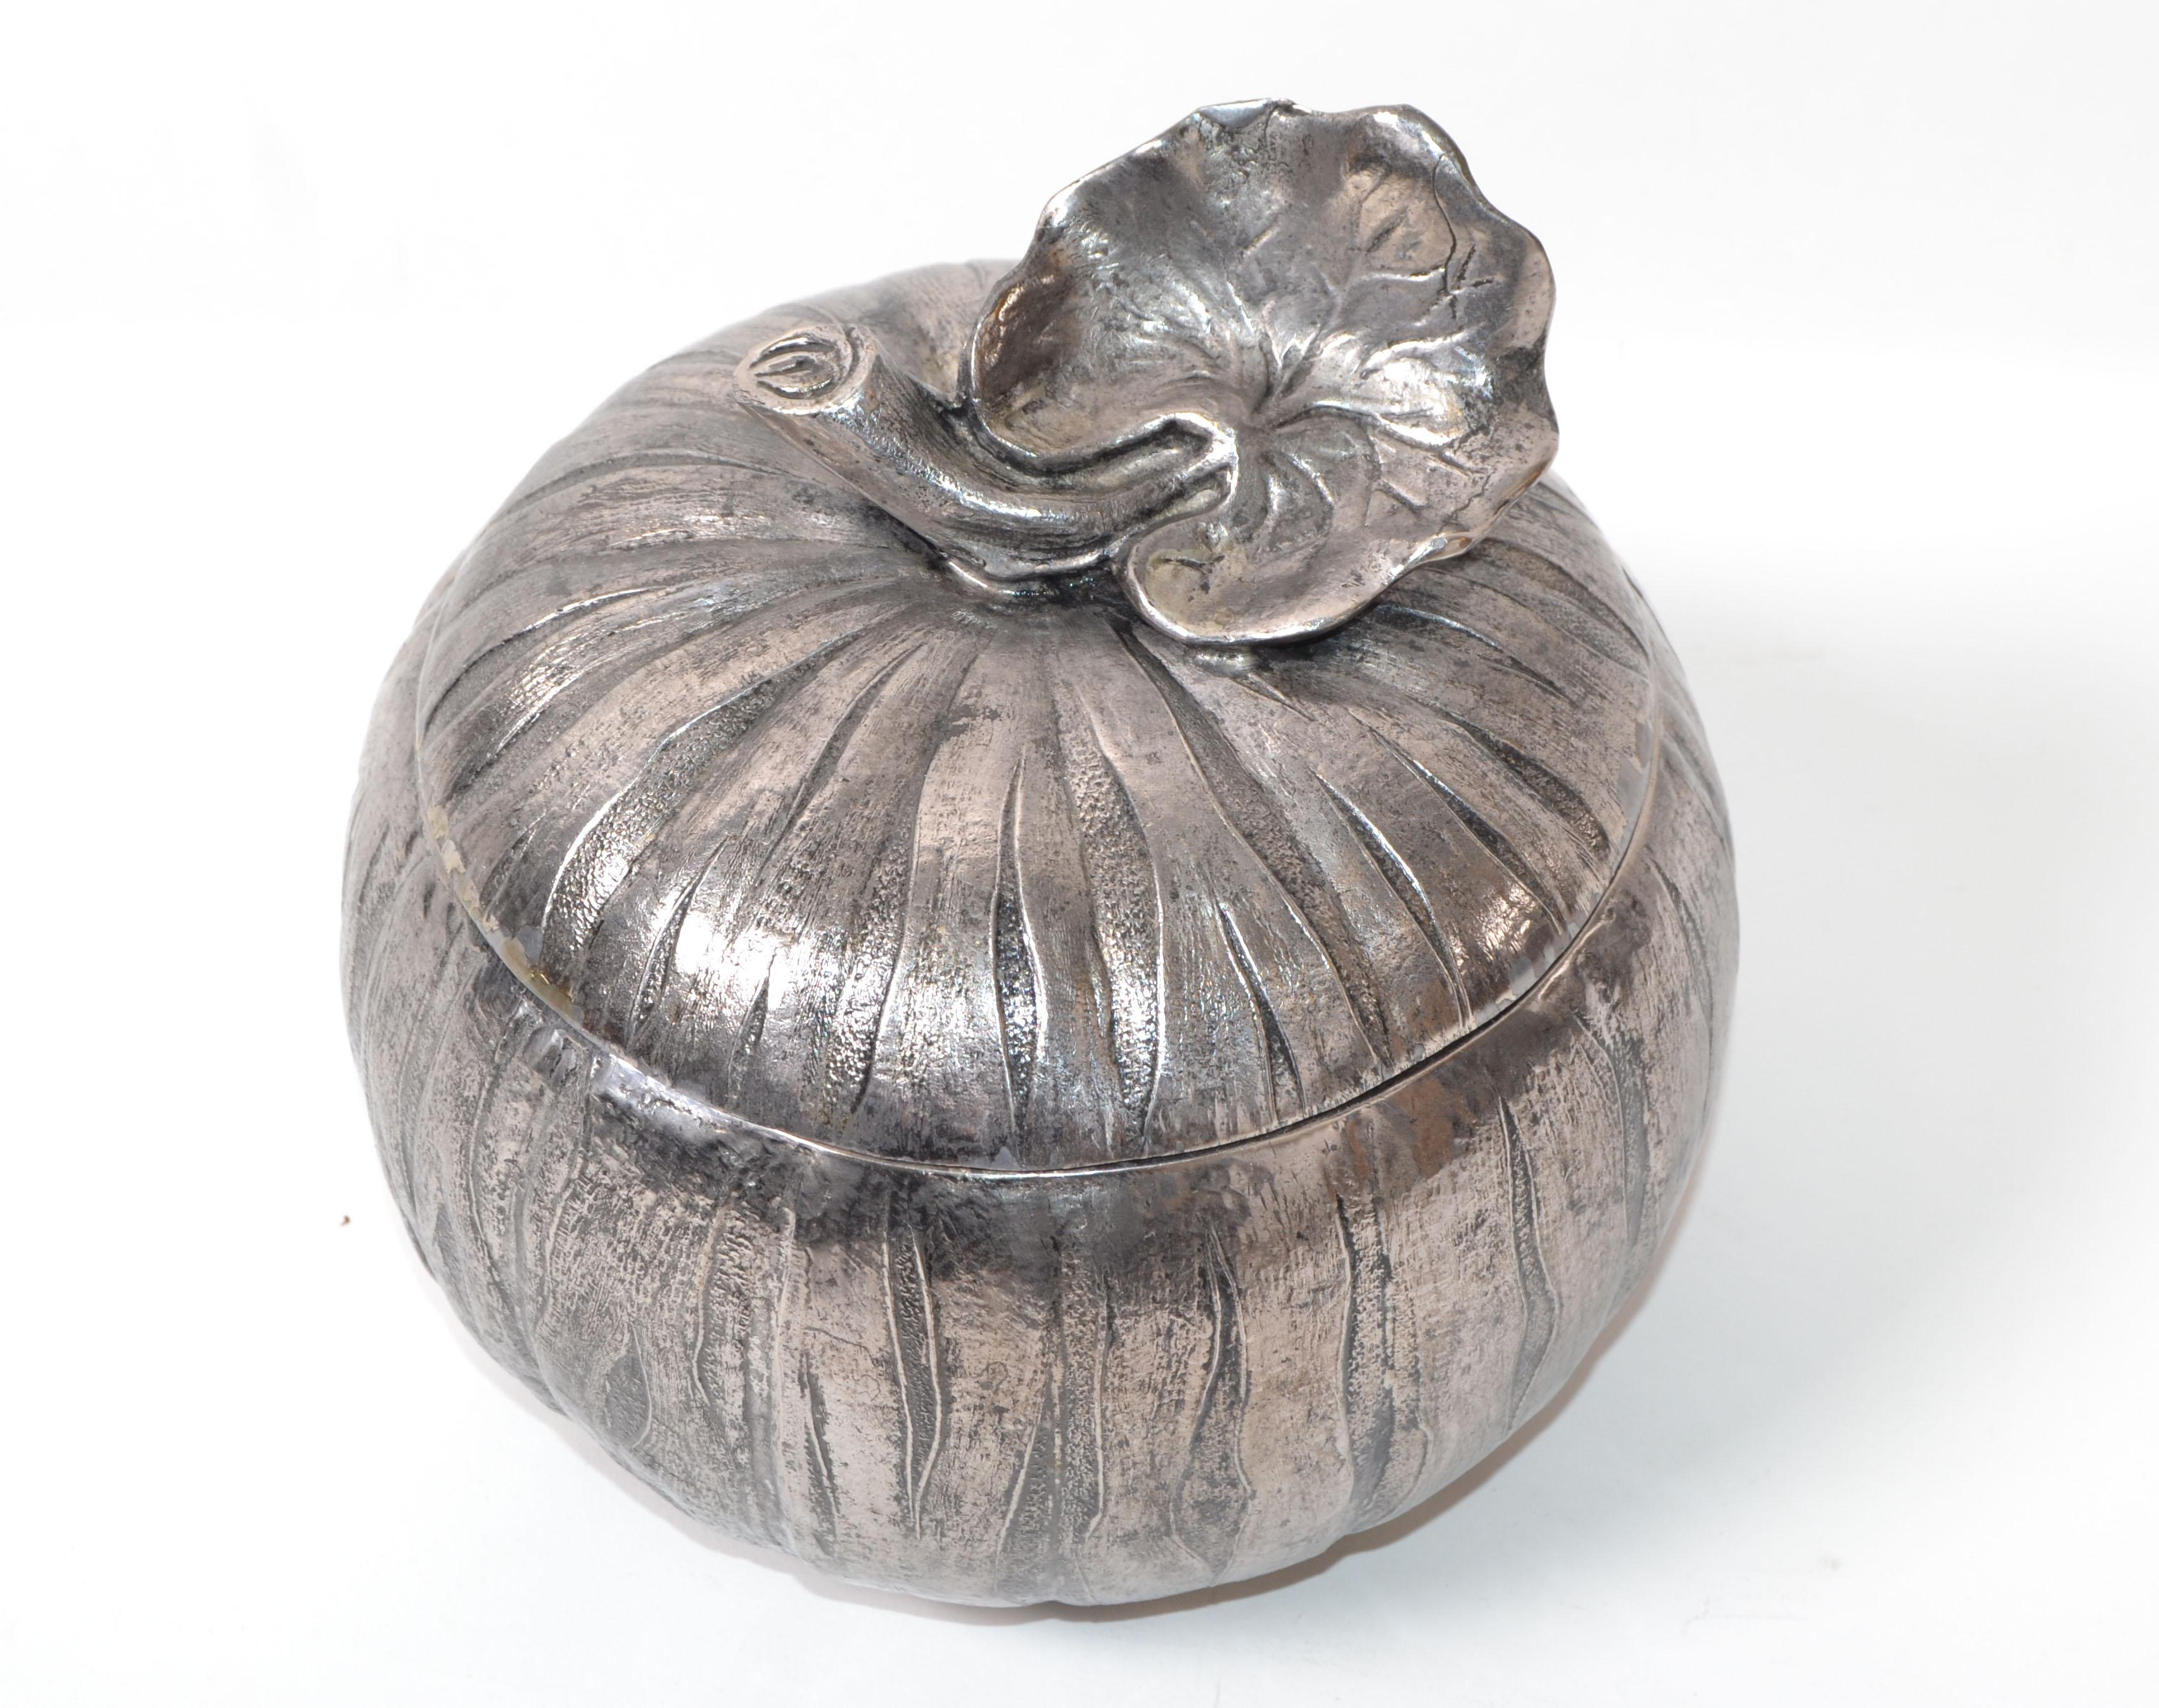 Original Mauro Manetti silver plate pumpkin ice bucket, made in Italy.
Keeps the ice cubes frozen for a long time as the lid sits tight on the bucket.

